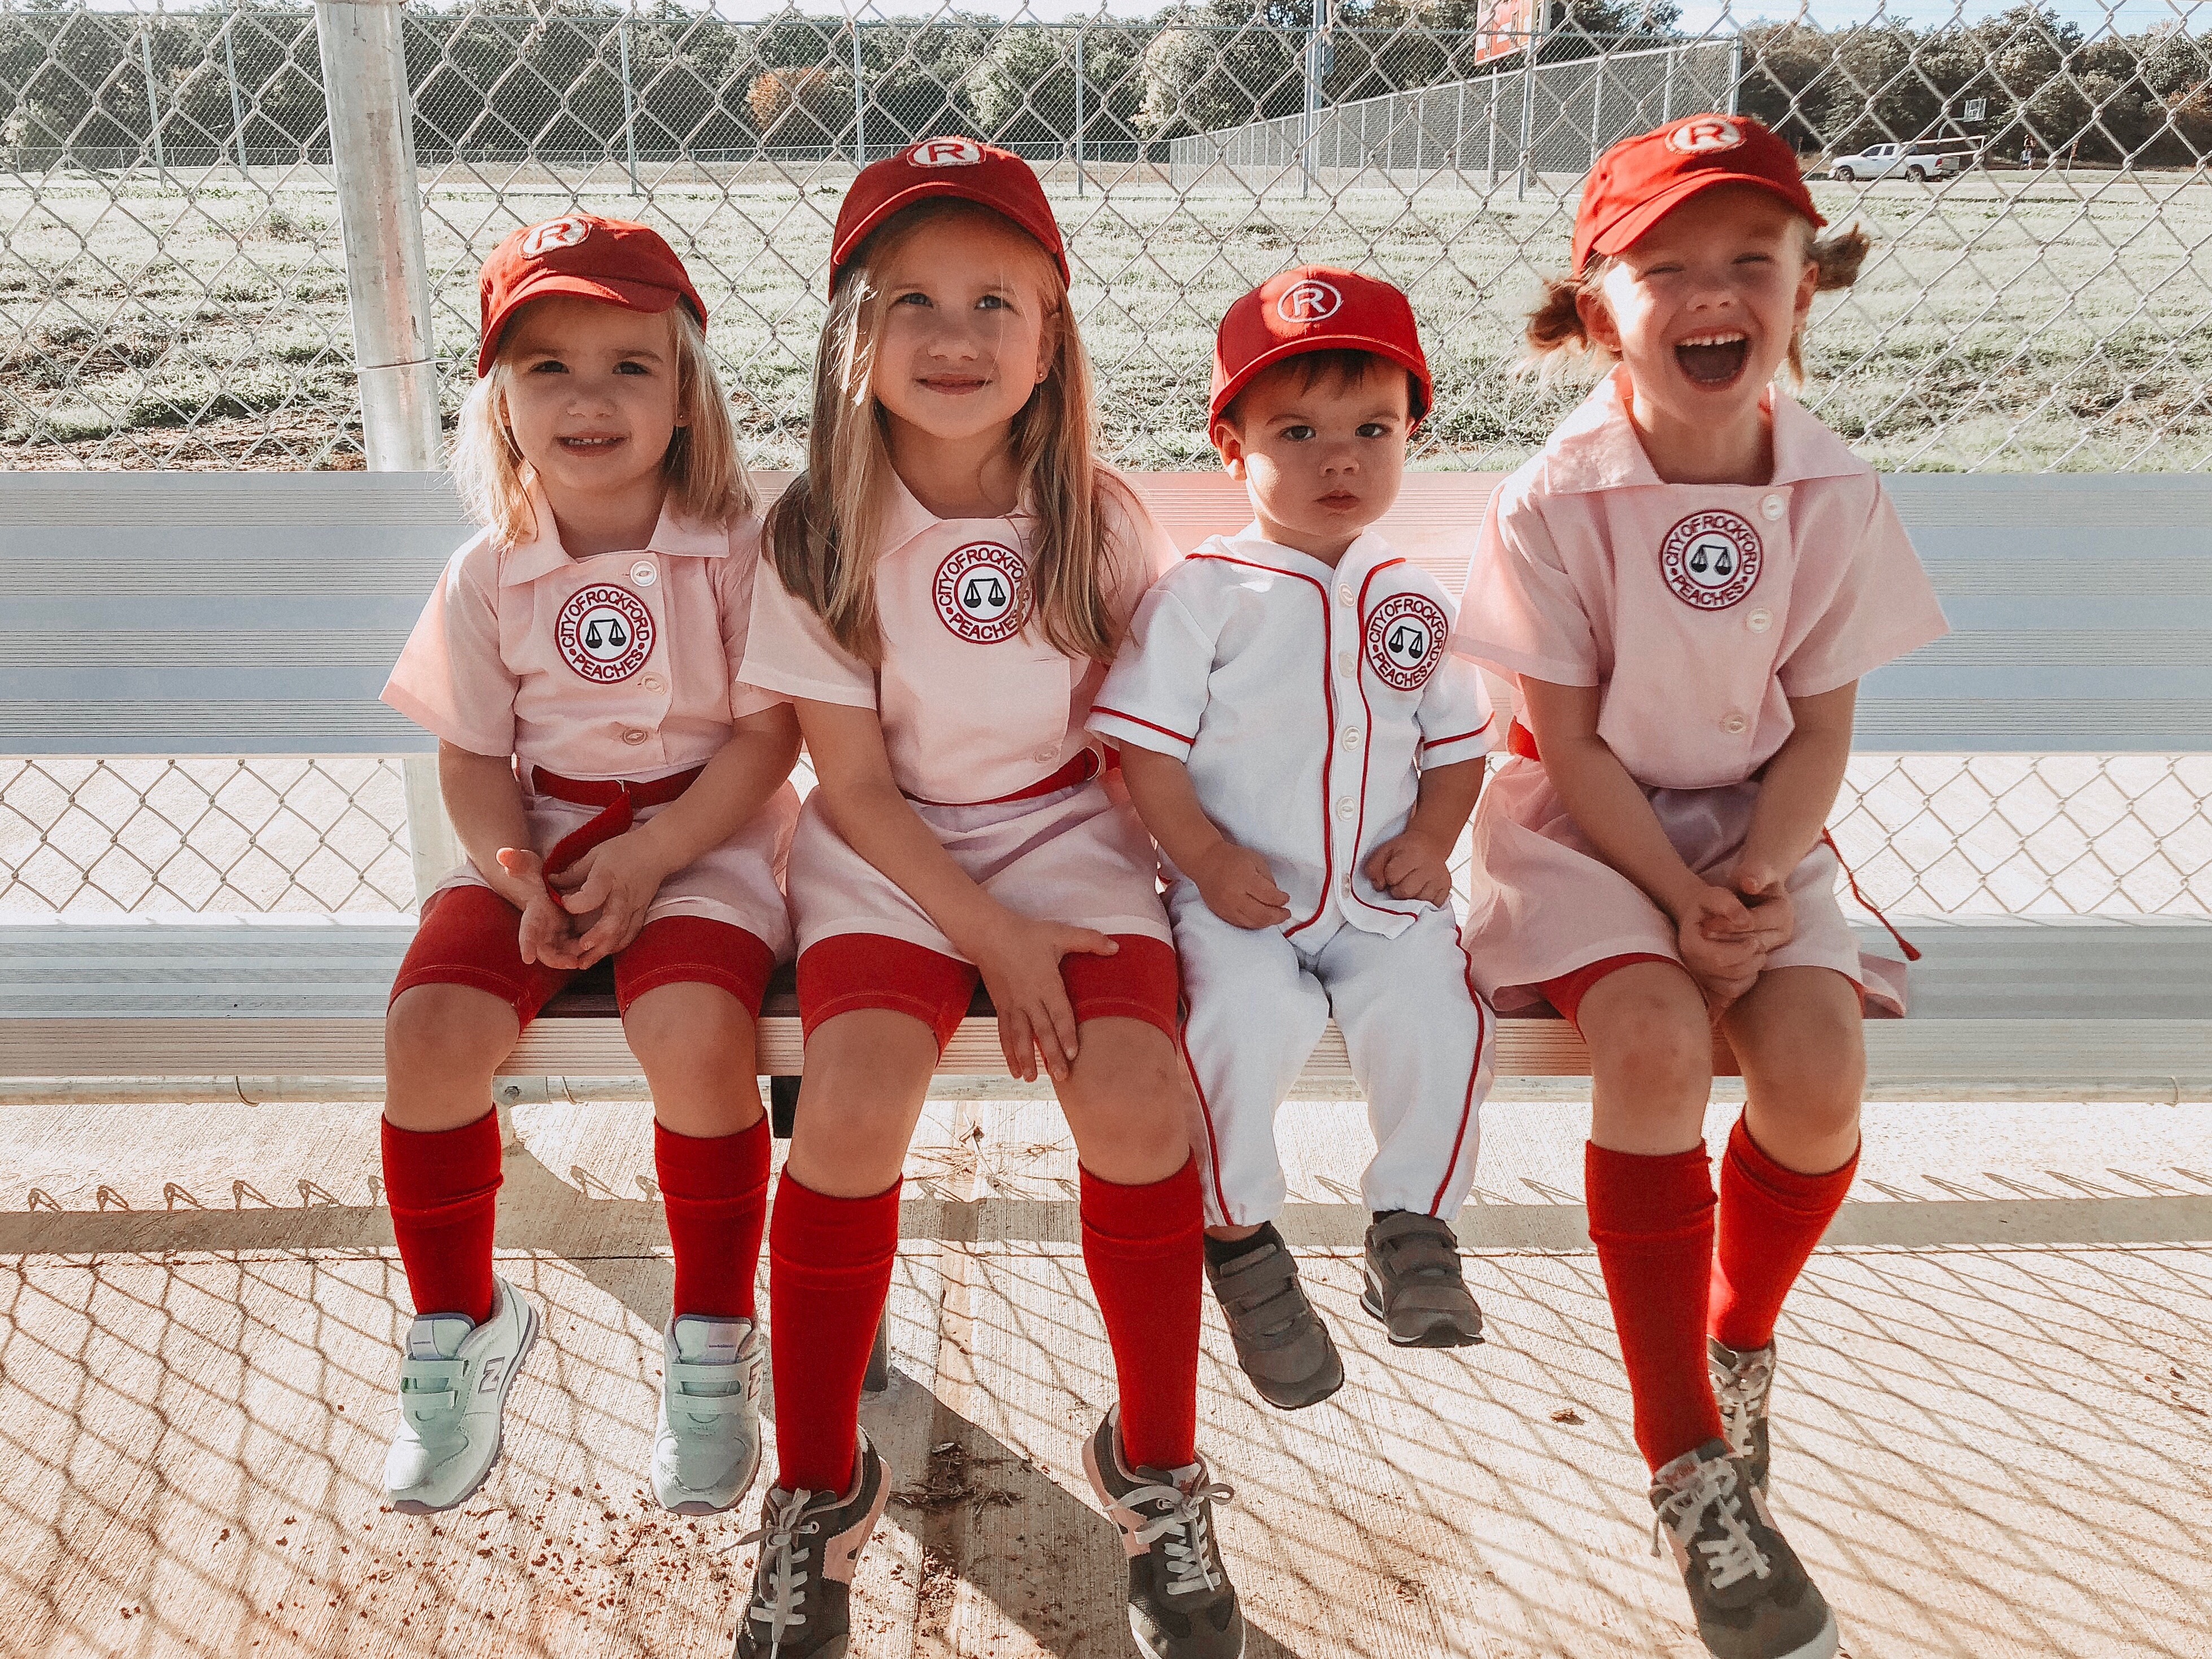 Trunk or Treat  Rockford Peaches - Showit Blog